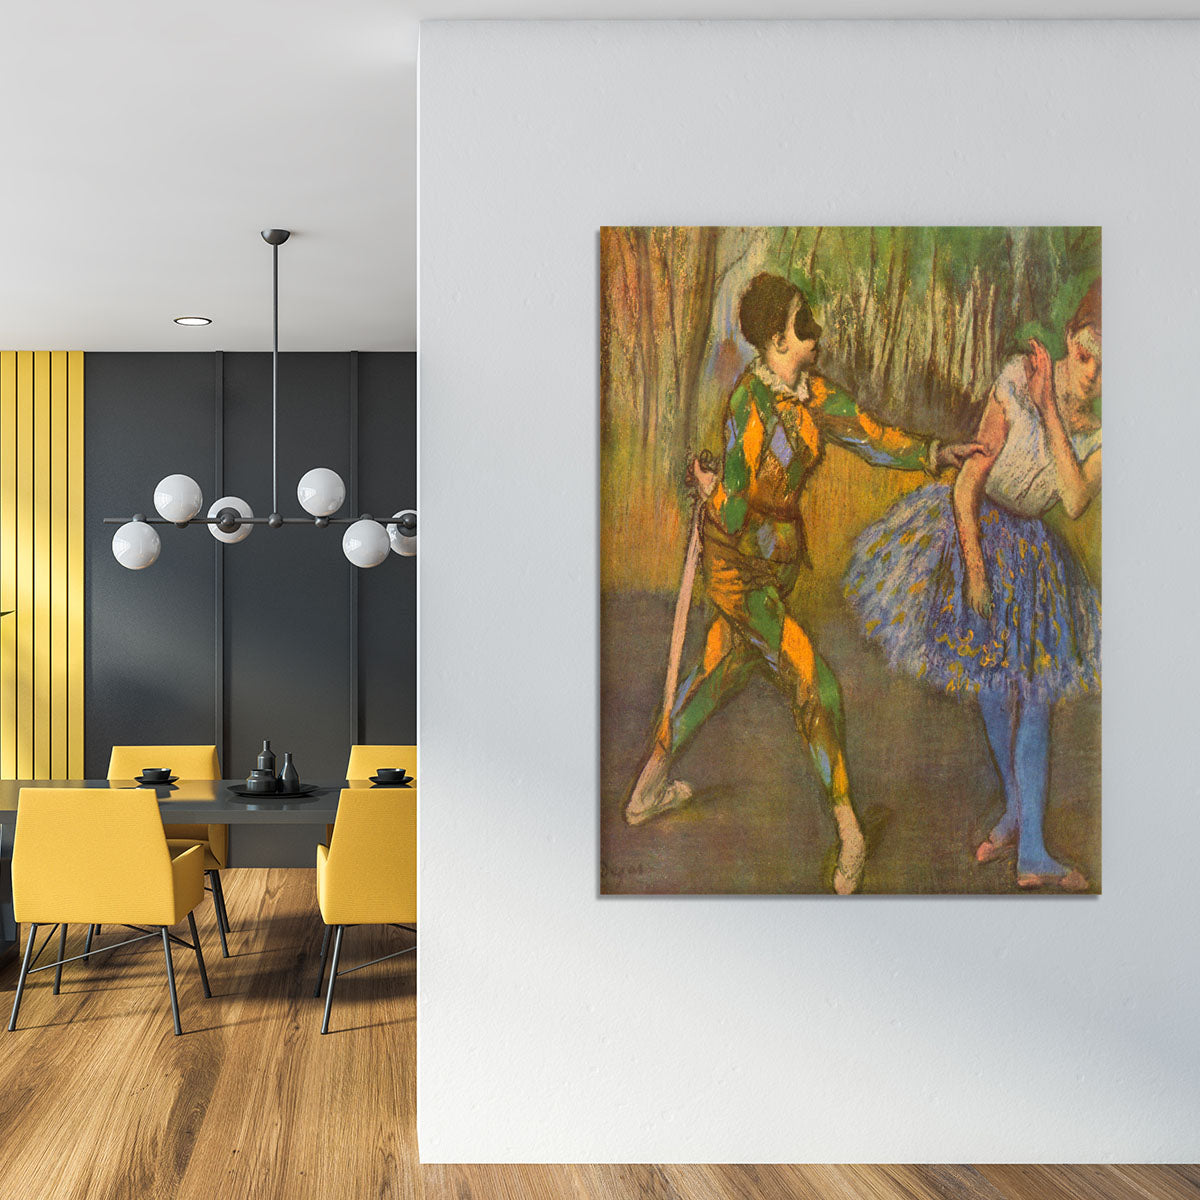 Harlequin and Columbine by Degas Canvas Print or Poster - Canvas Art Rocks - 4